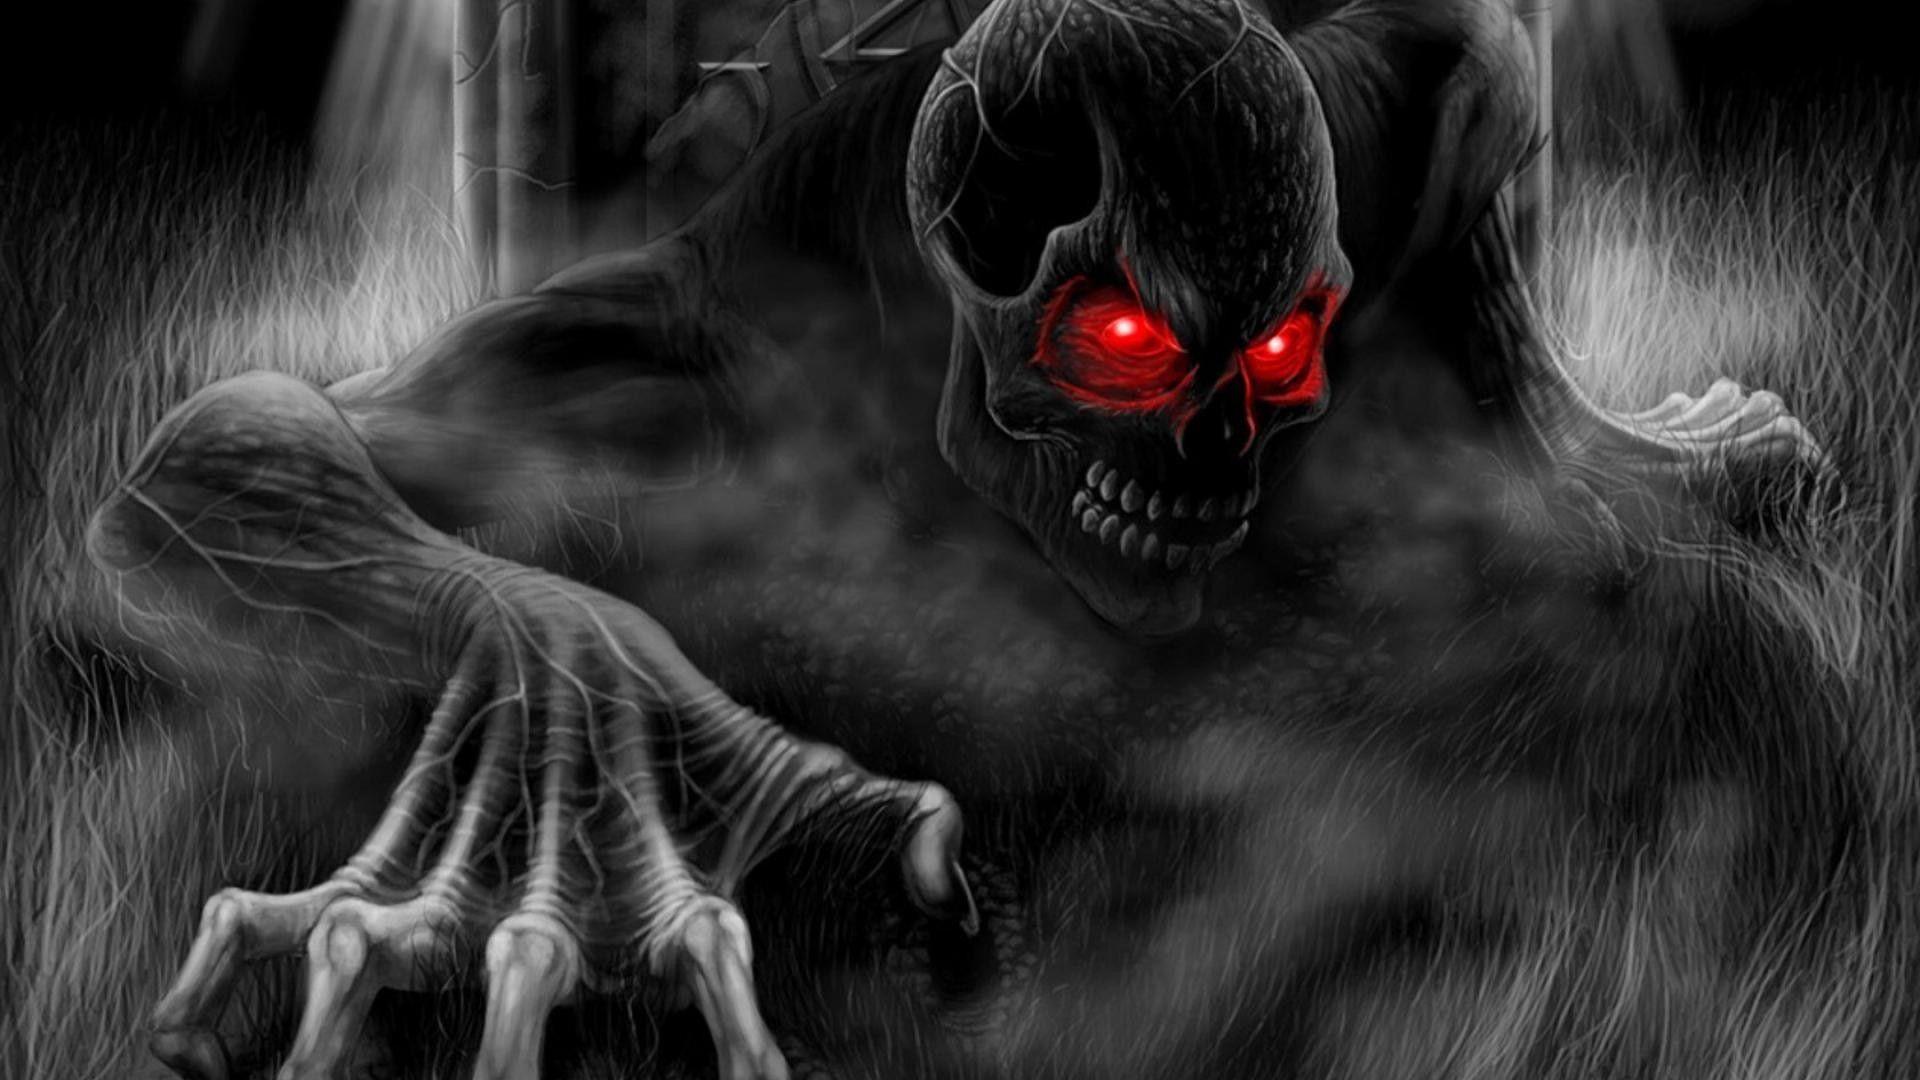 Ghost and Demon Wallpaper Free Download HD Latest New devil Image